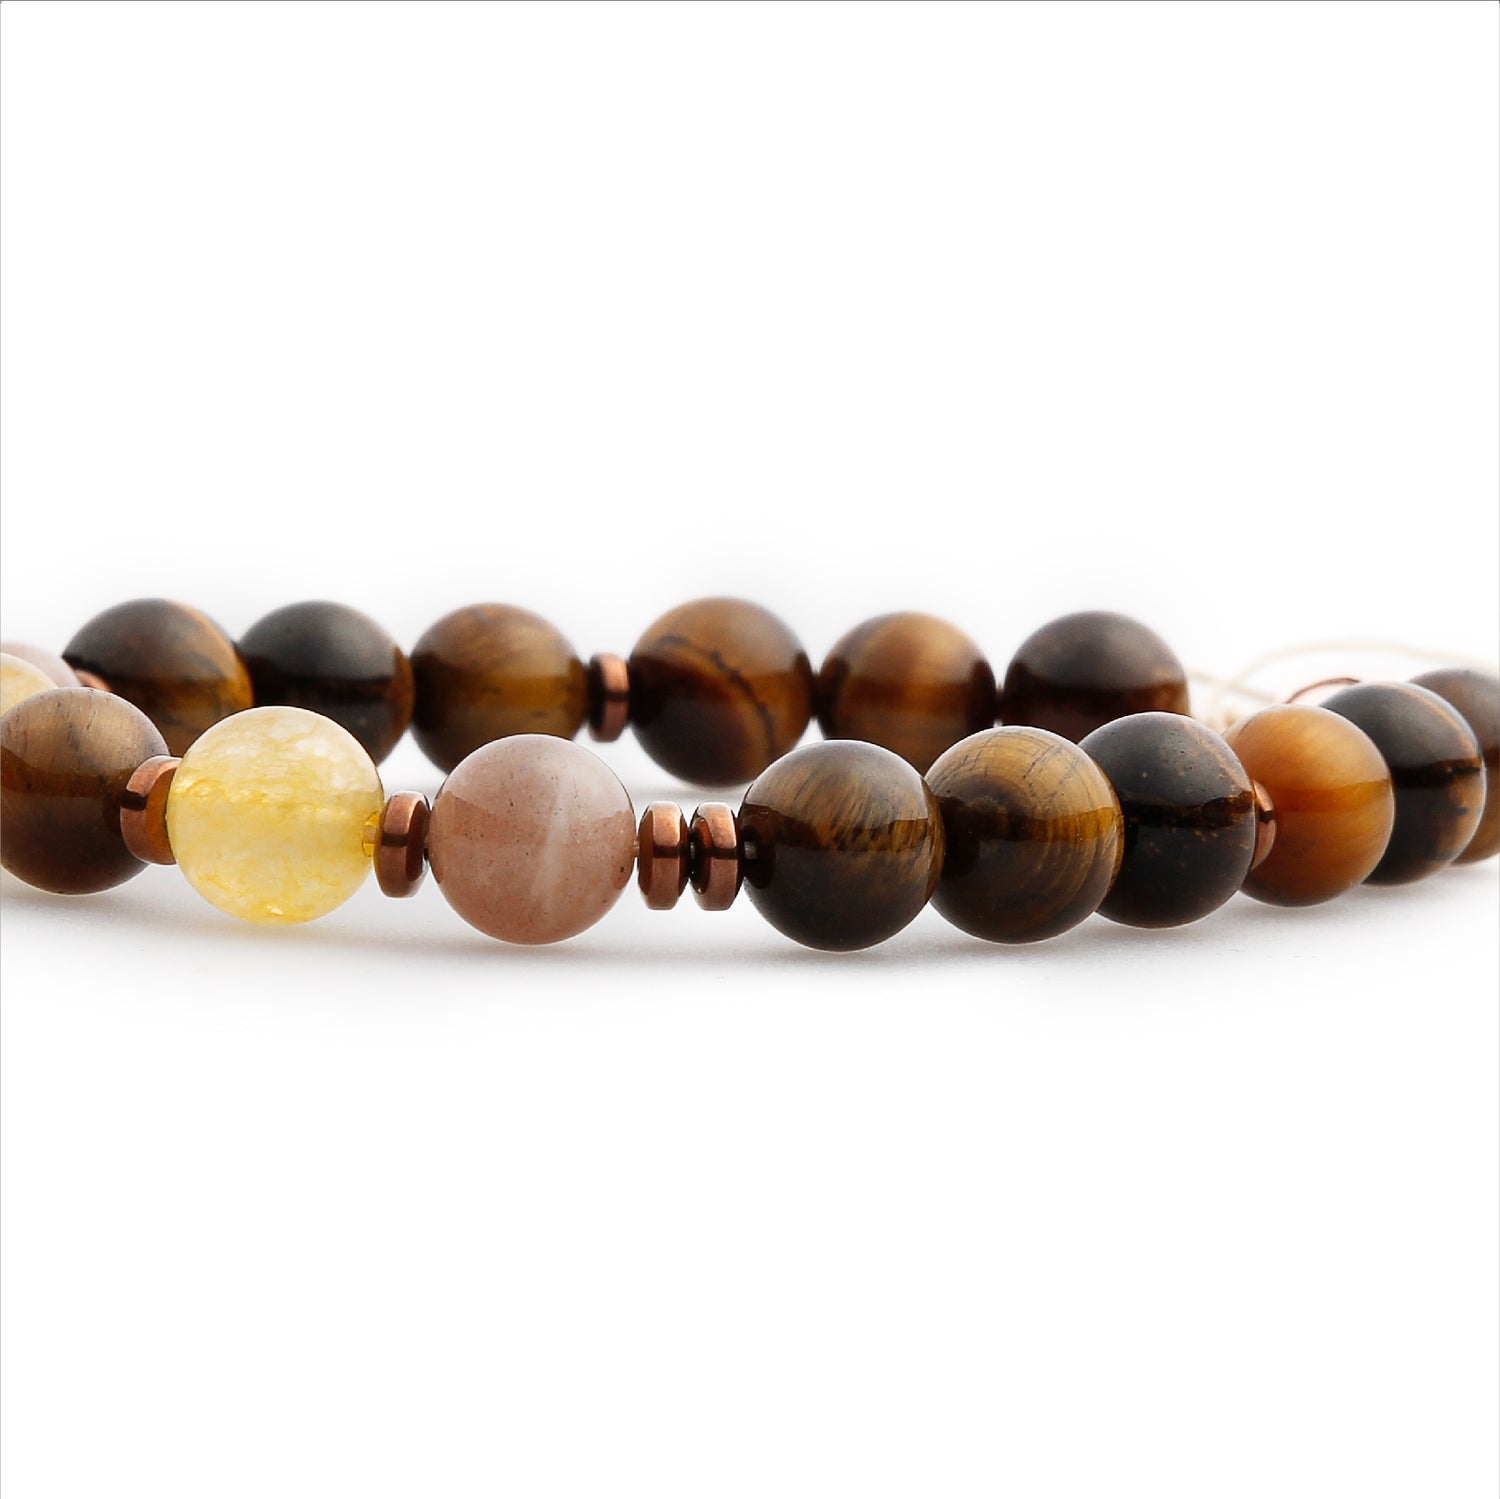 High quality beads with tigers eye sun stone and citrine for bliss